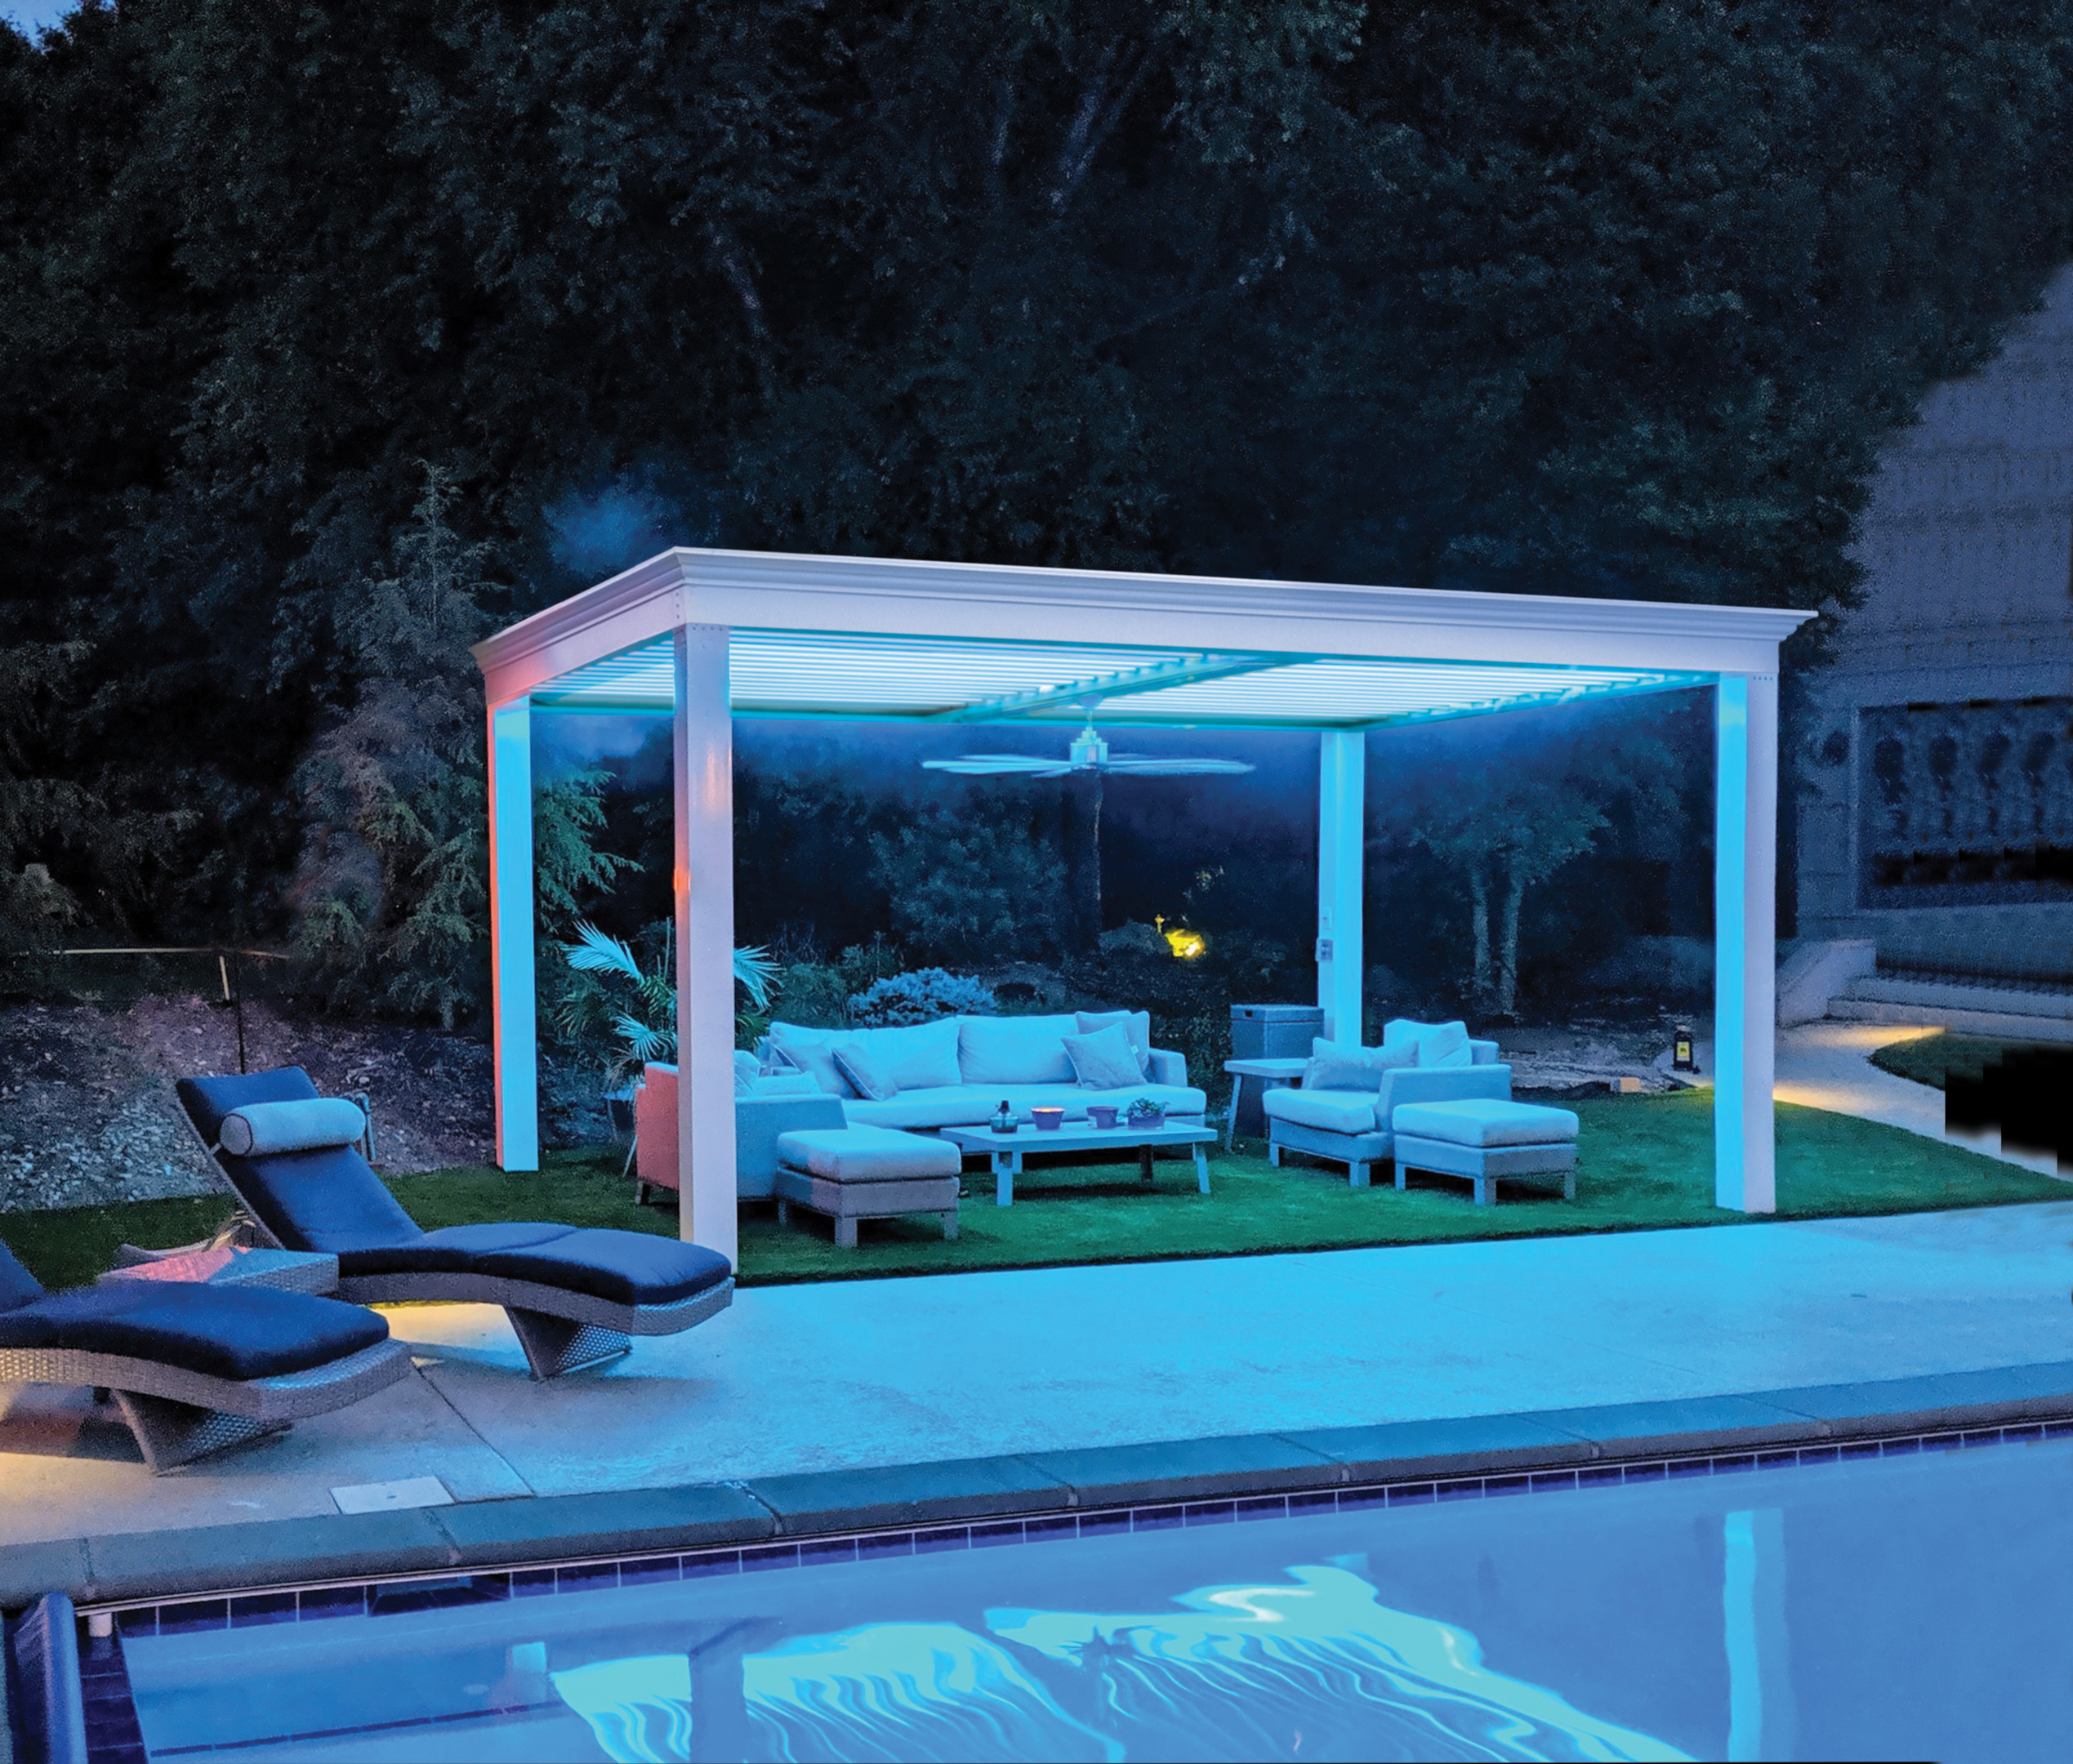 Aluminum Pergola in Backyard Space, plenty of fresh air and beauty with this outdoor structure.